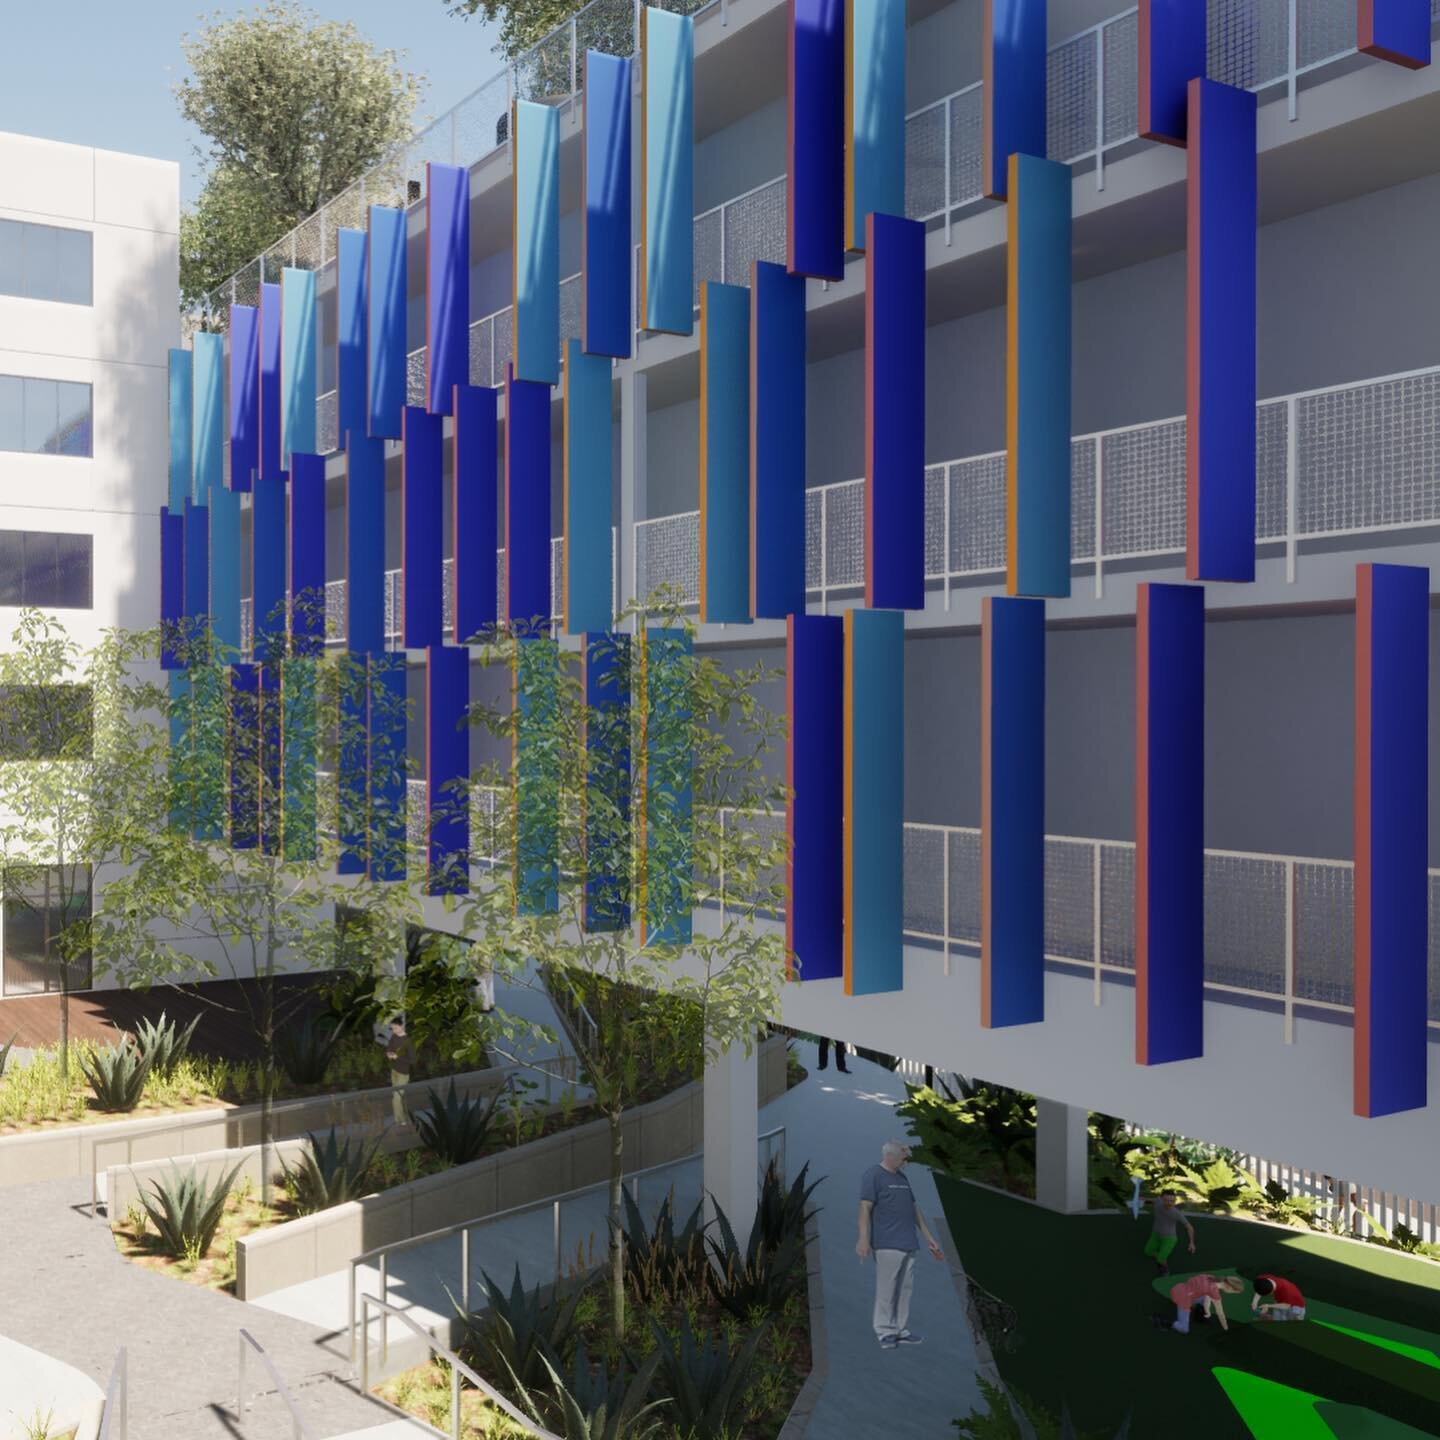 Check out the courtyard at 619 Westlake! Flip to see the fins change colors when viewed from different directions. This affordable housing project will provide 78 units for homeless families and individuals. @metahousingcorp @superjacent